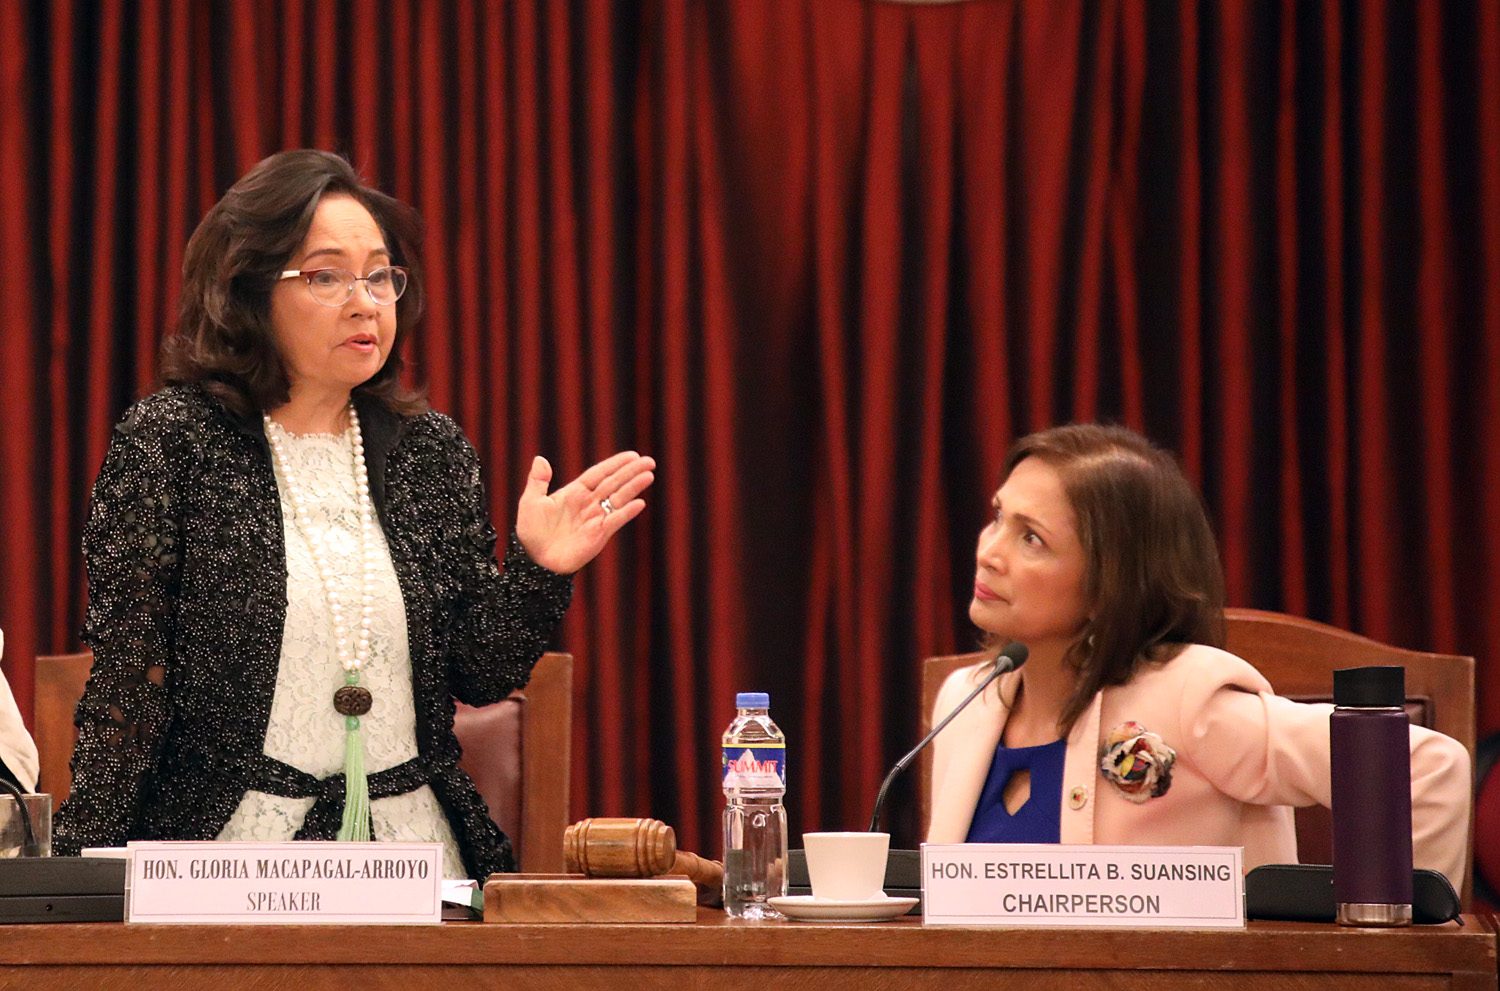 DICTATING THE PACE. House ways and means chairperson Estrellita Suansing listens to Arroyo during a hearing on November 13, 2018. File photo by Darren Langit/Rappler   